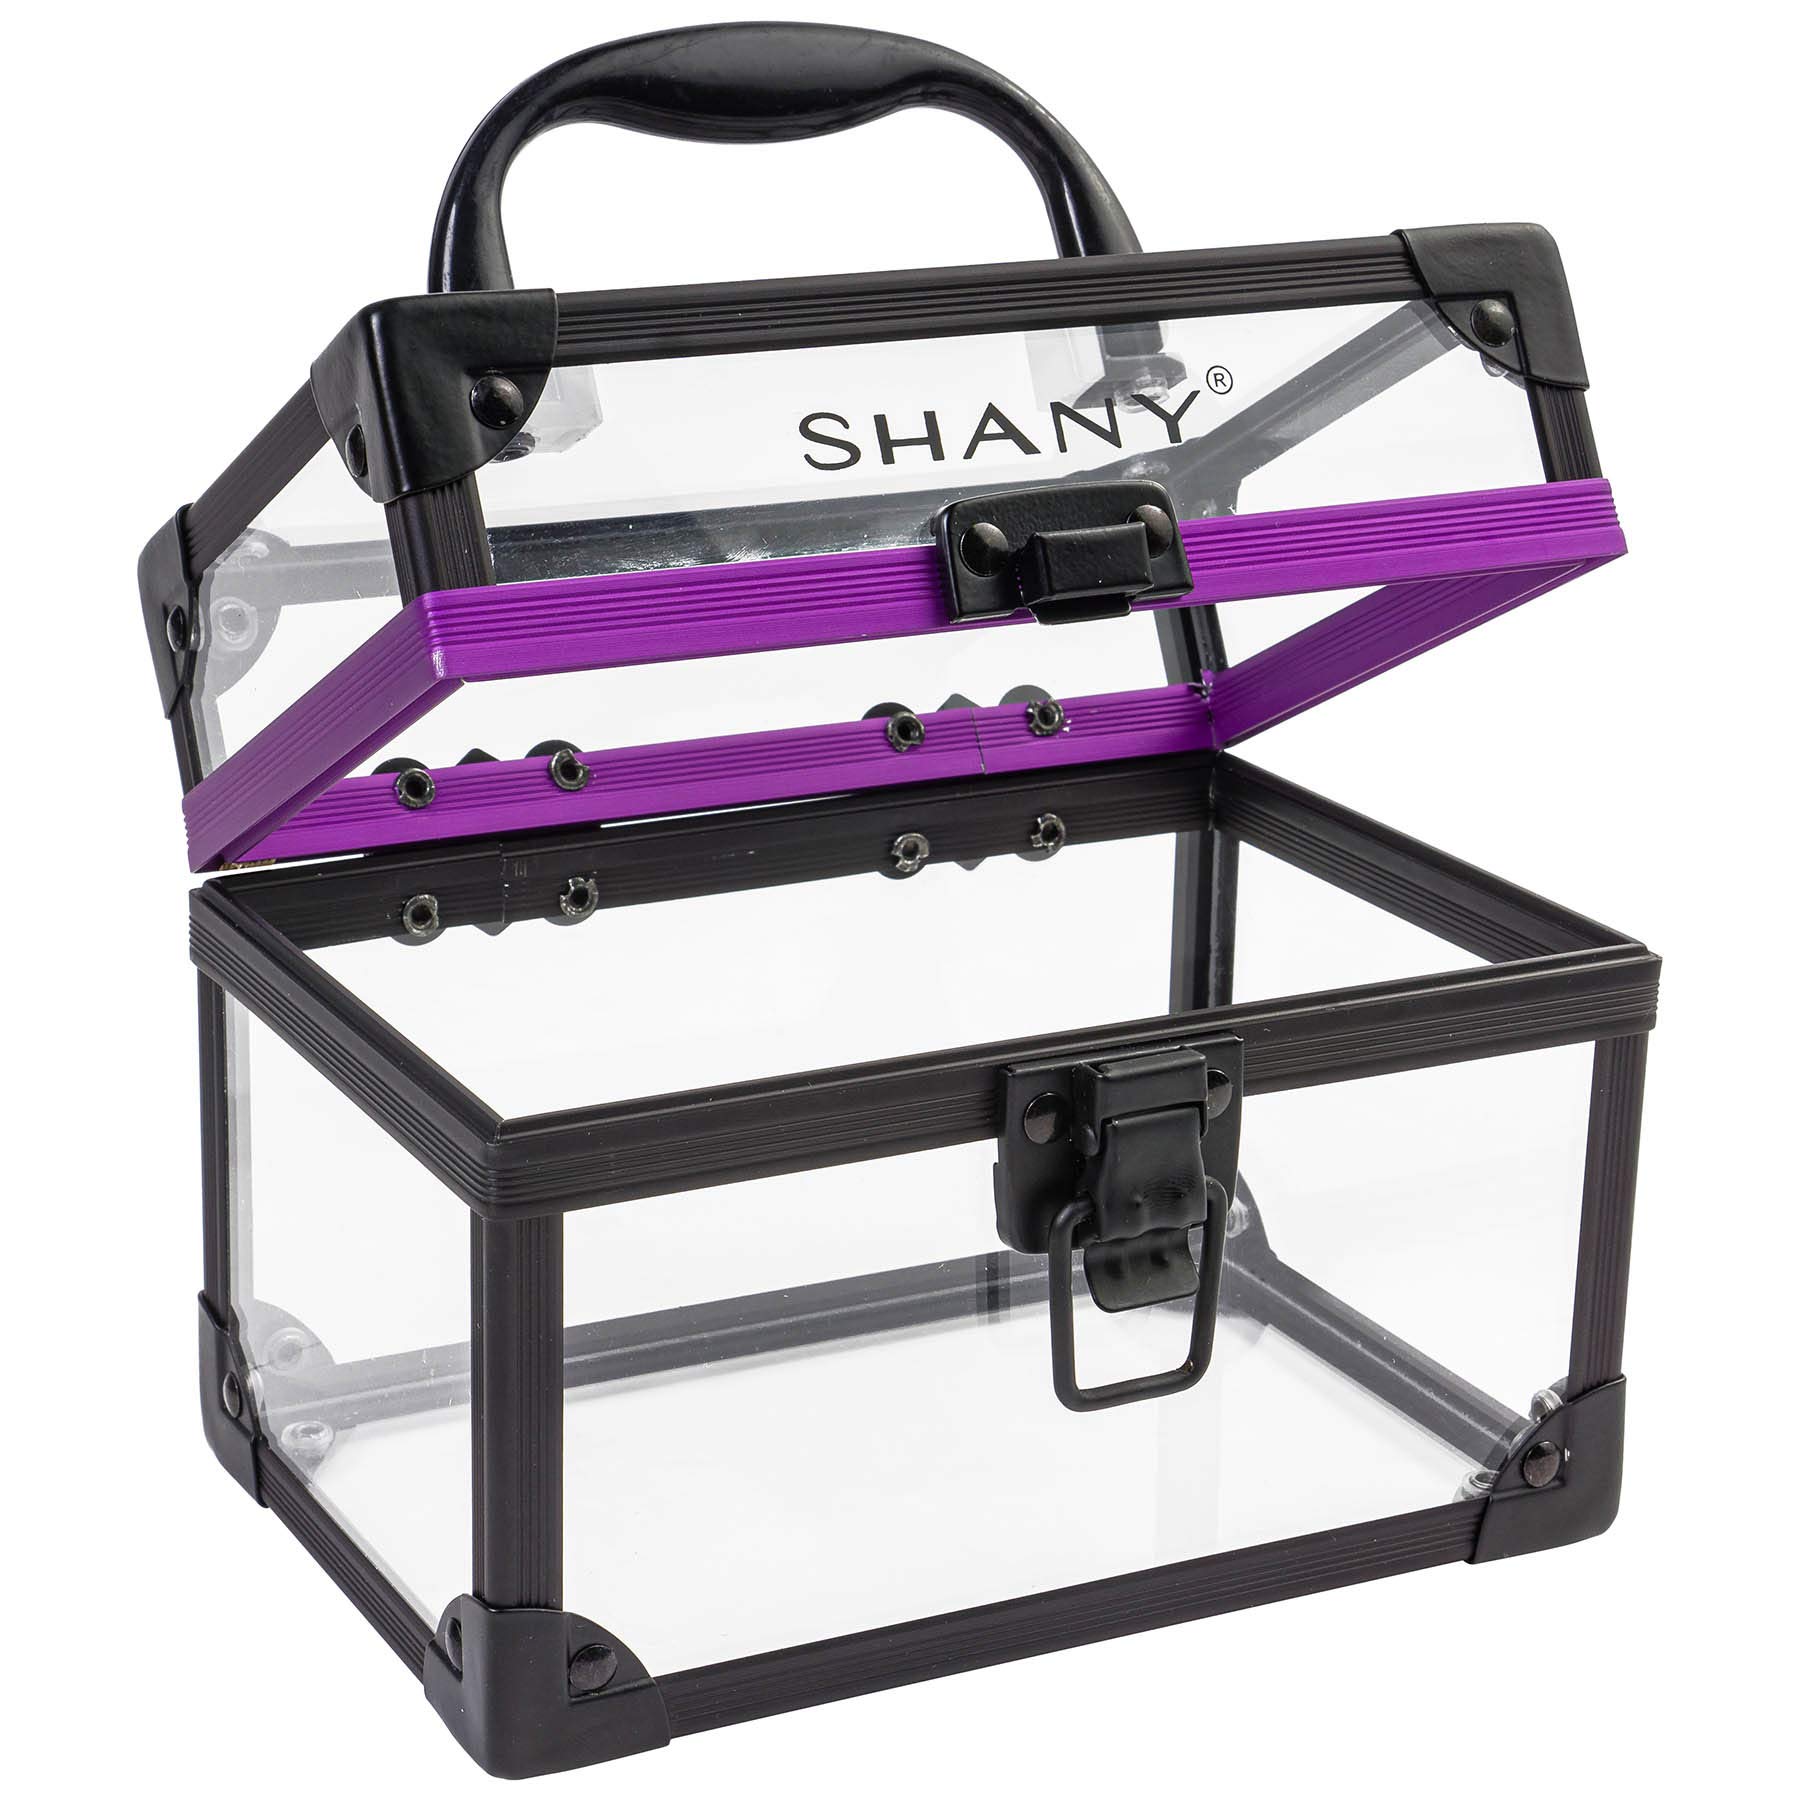 SHANY Clear Cosmetics and Toiletry Train Case - Large-Sized Travel Makeup Organizer with Secure Closure and Black